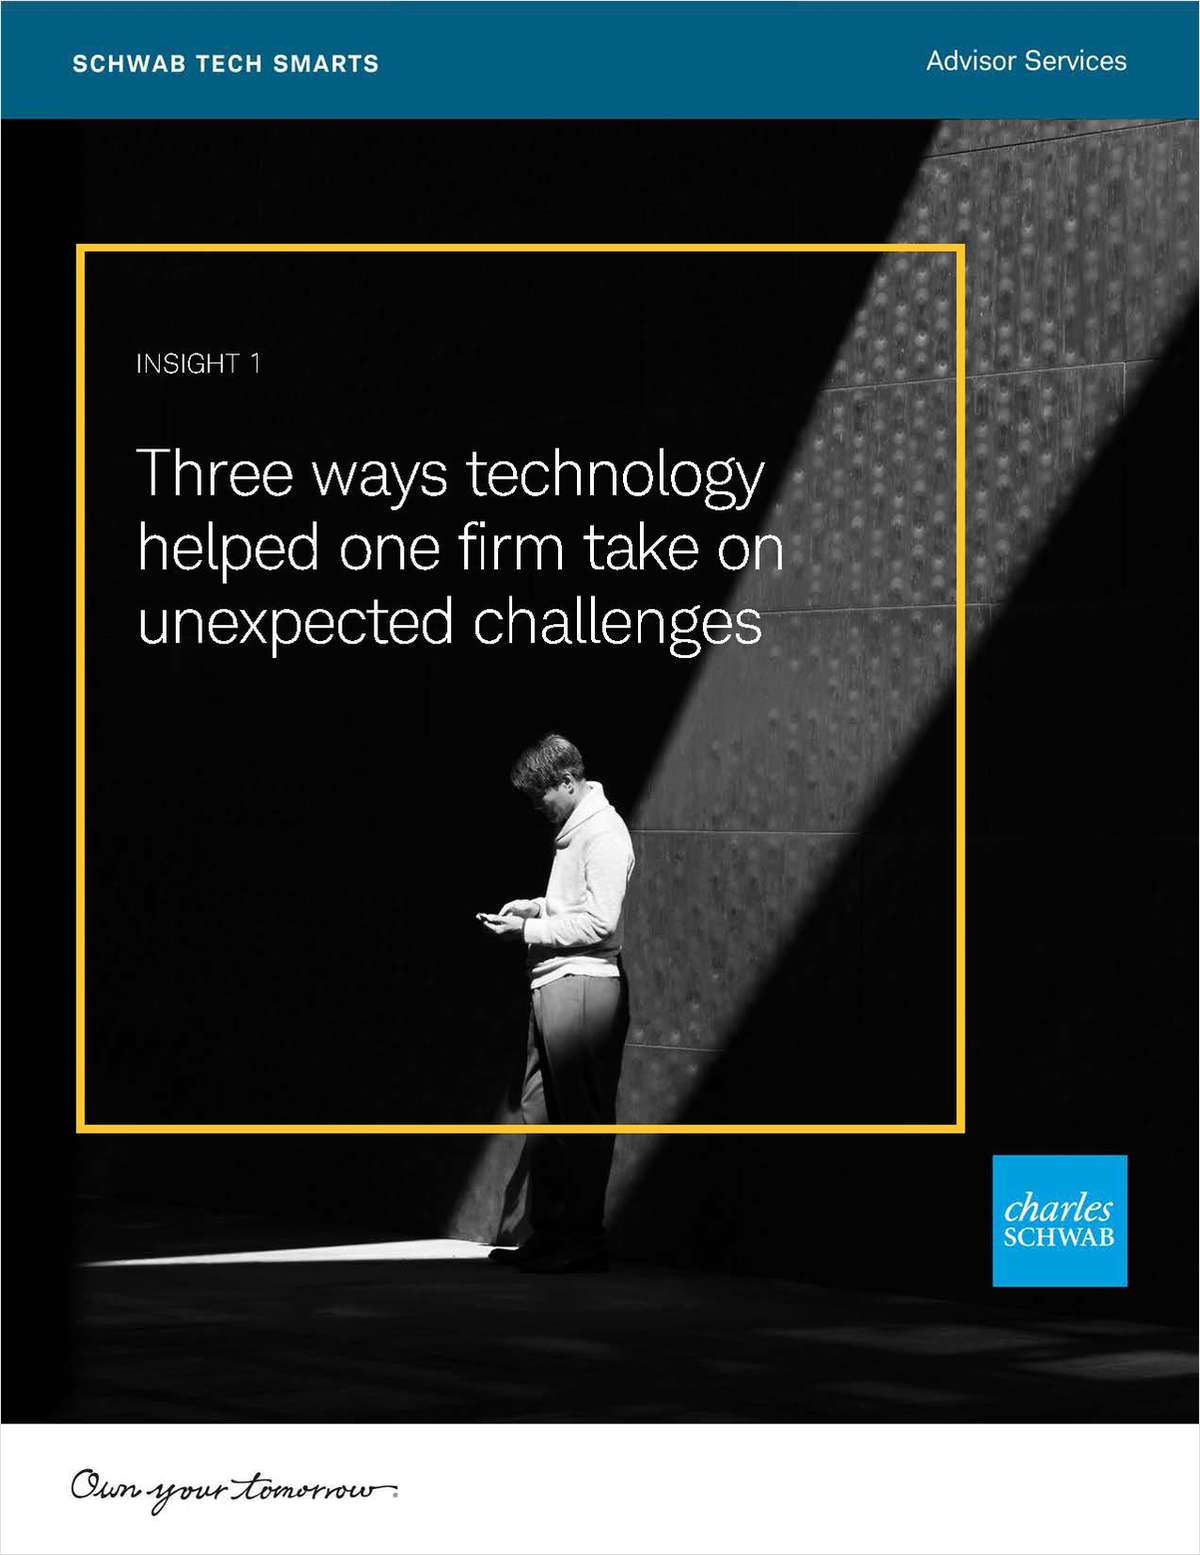 Three Ways Technology Helped One Firm Take on Unexpected Challenges